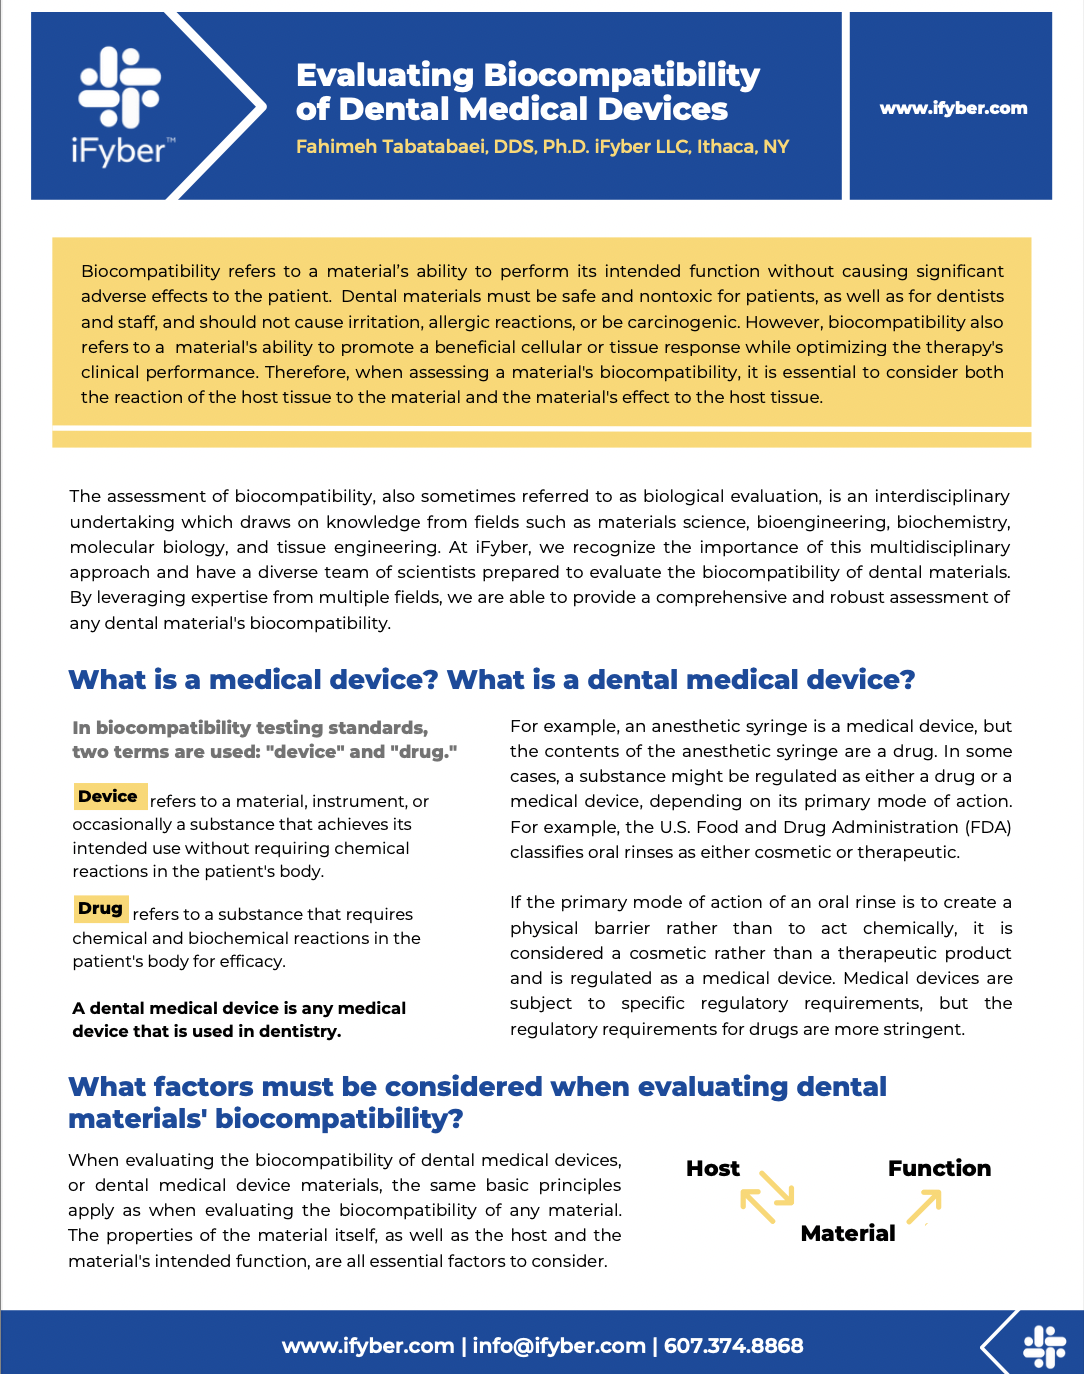 Evaluating Biocompatibility of Dental Medical Devices